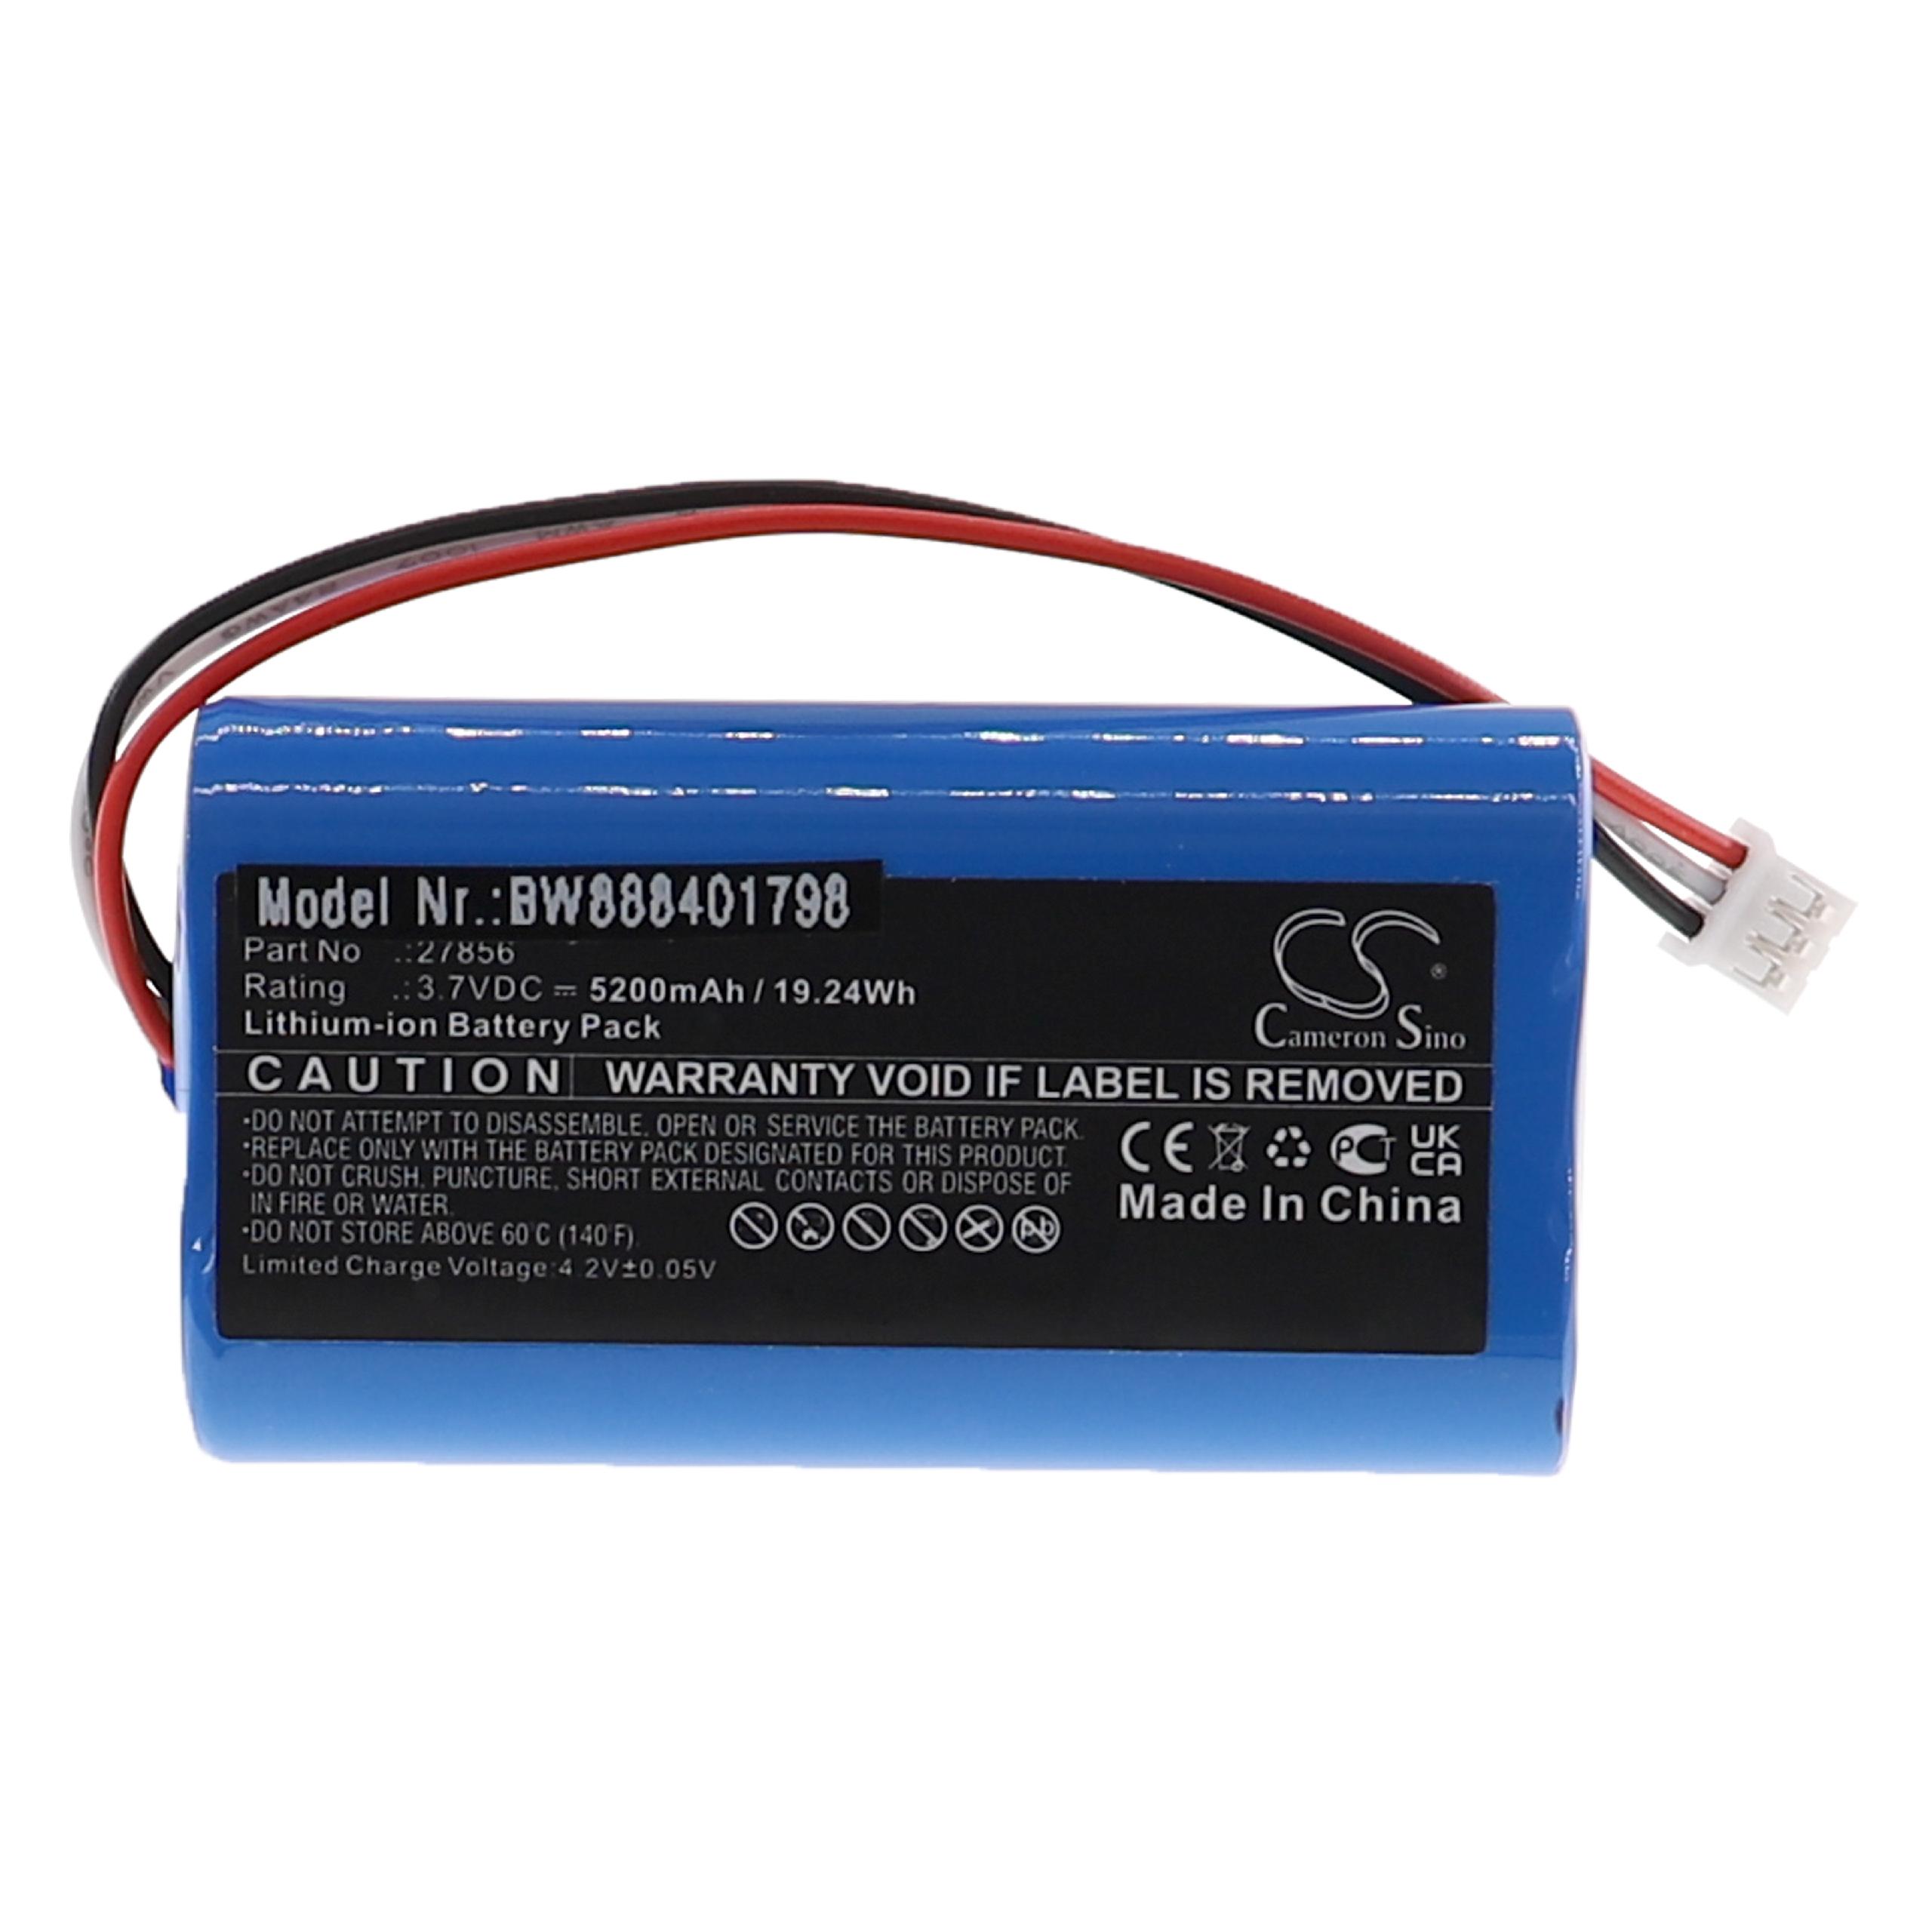 DAB Radio Battery Replacement for Albrecht 27856 - 5200mAh 3.7V Li-Ion